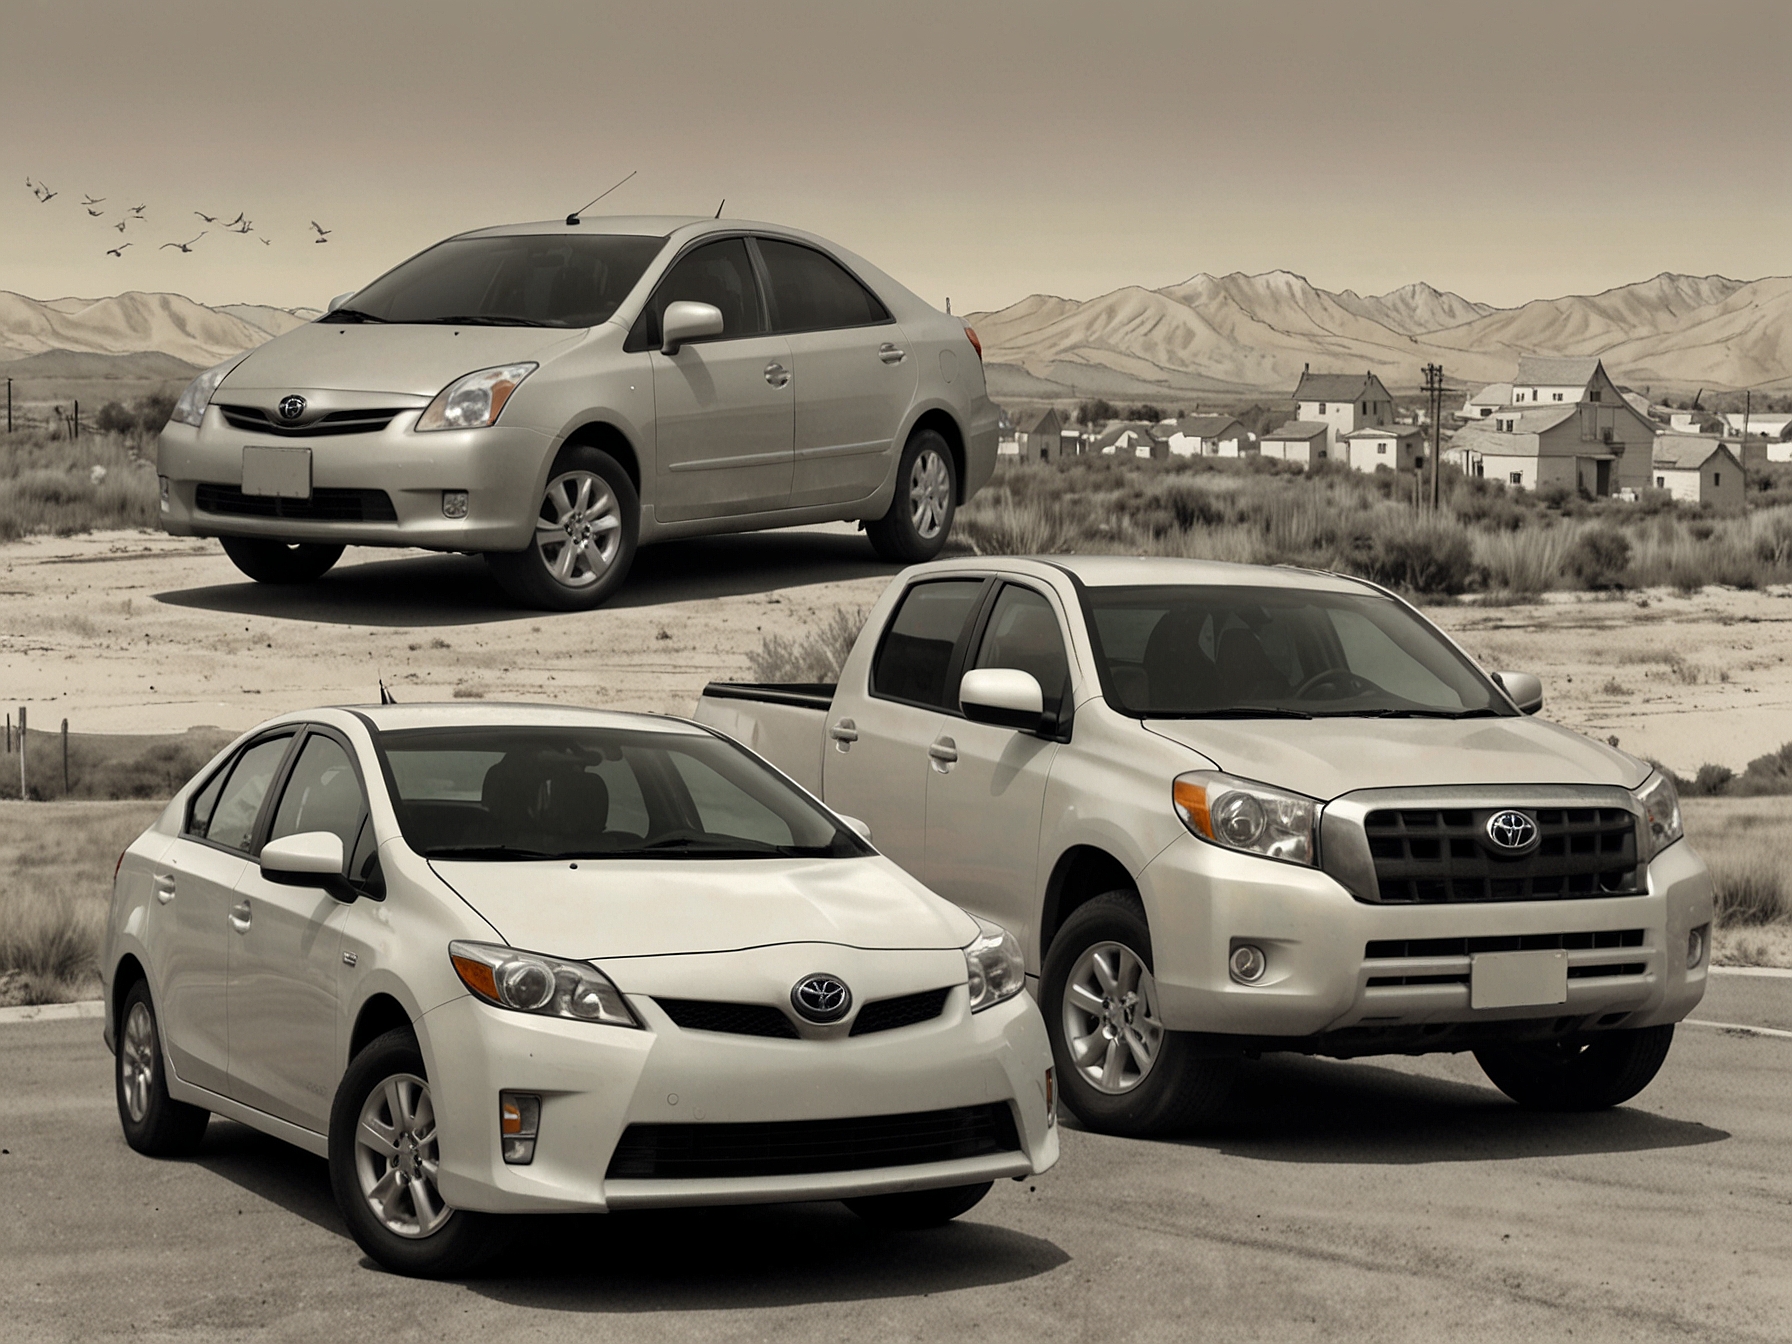 A split image showing Jon Tester with his Toyota Prius in an urban setting and his pickup truck in a rural landscape, highlighting his practical approach to vehicle choices.